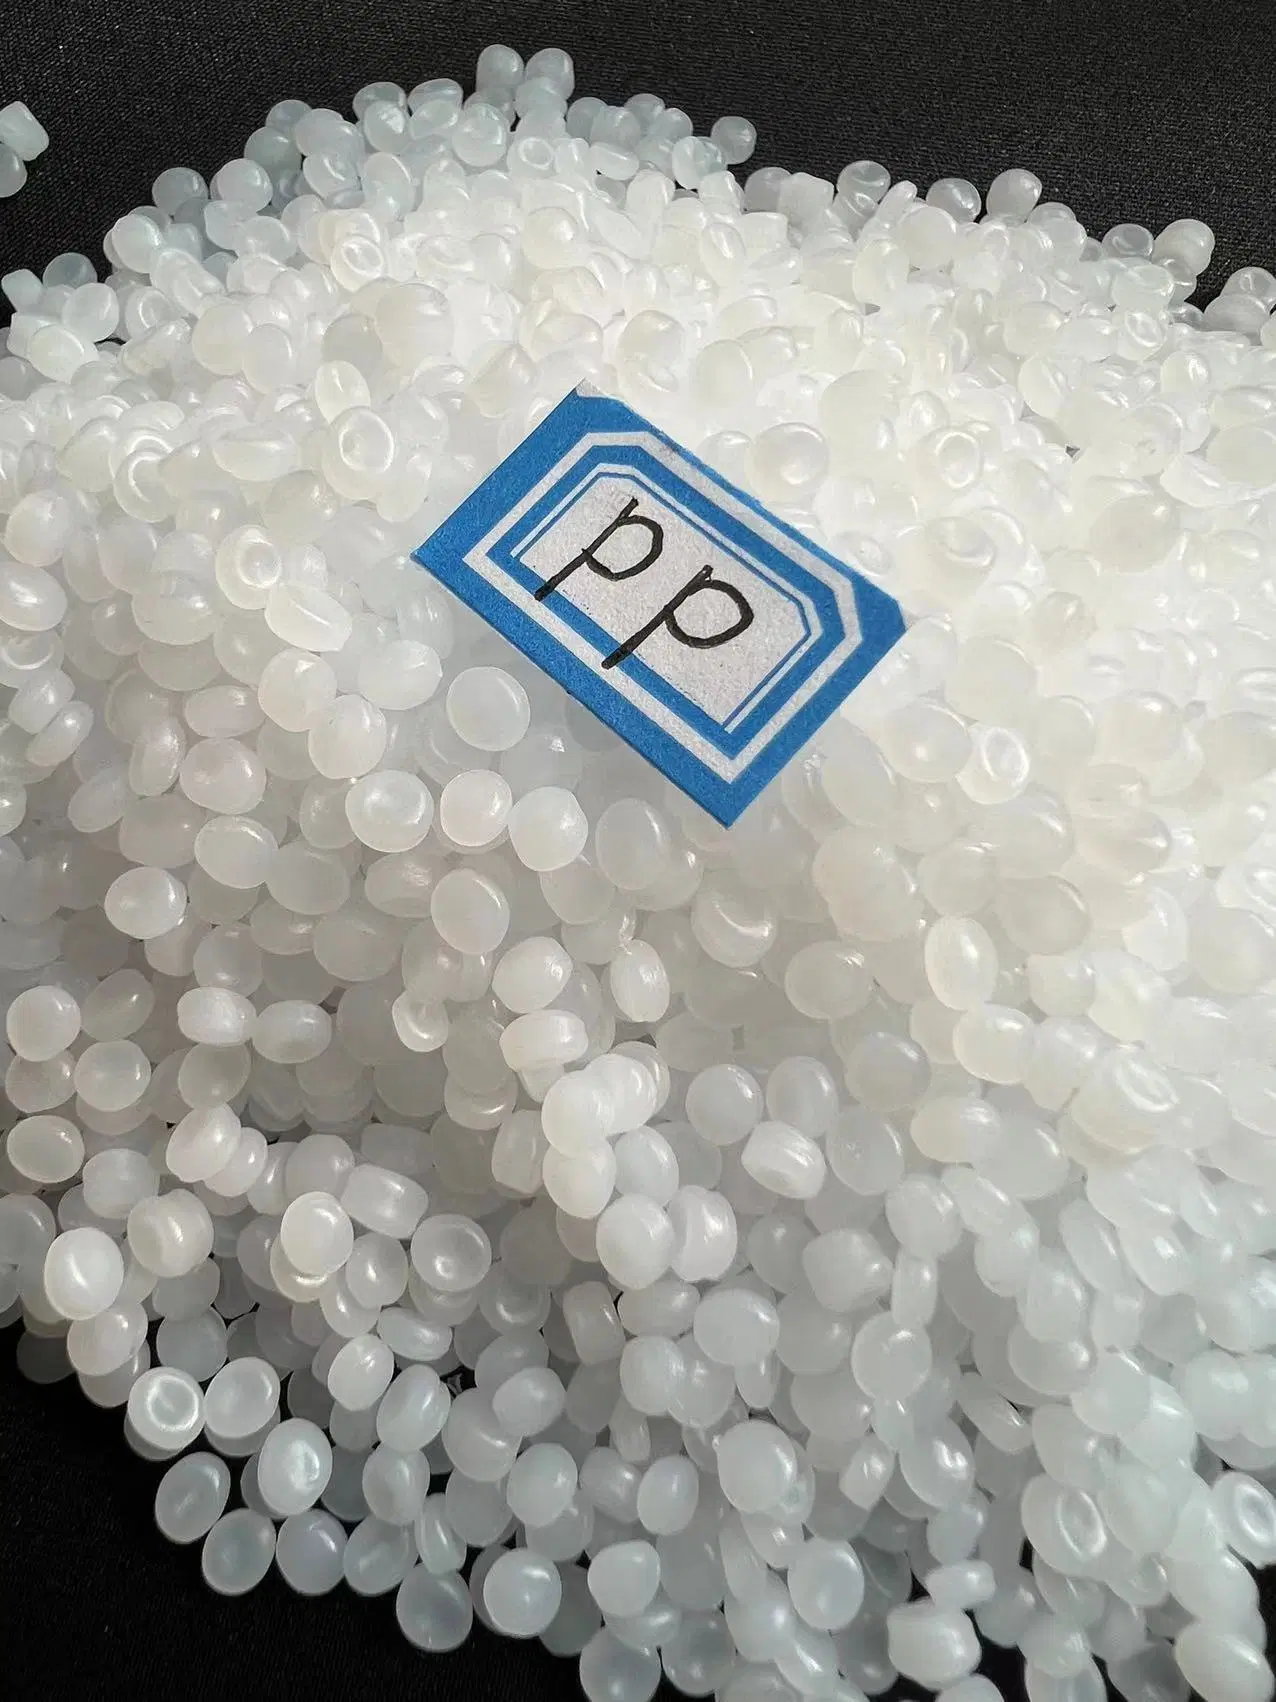 K8003 Polypropylene PP Resin for Packaging Container Injection Molding Material